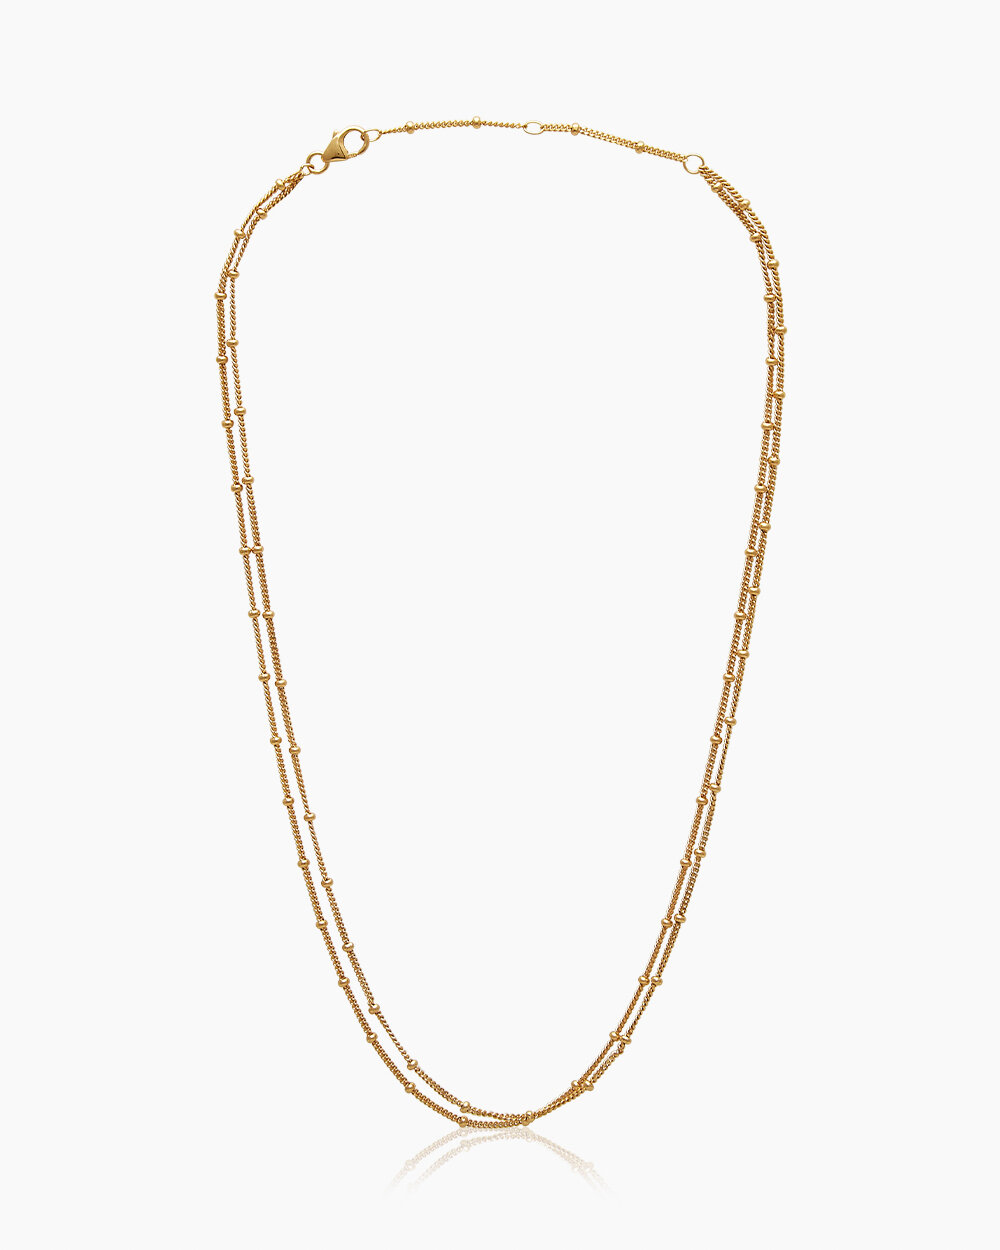 Loulou Gold Necklace - 02.jpg